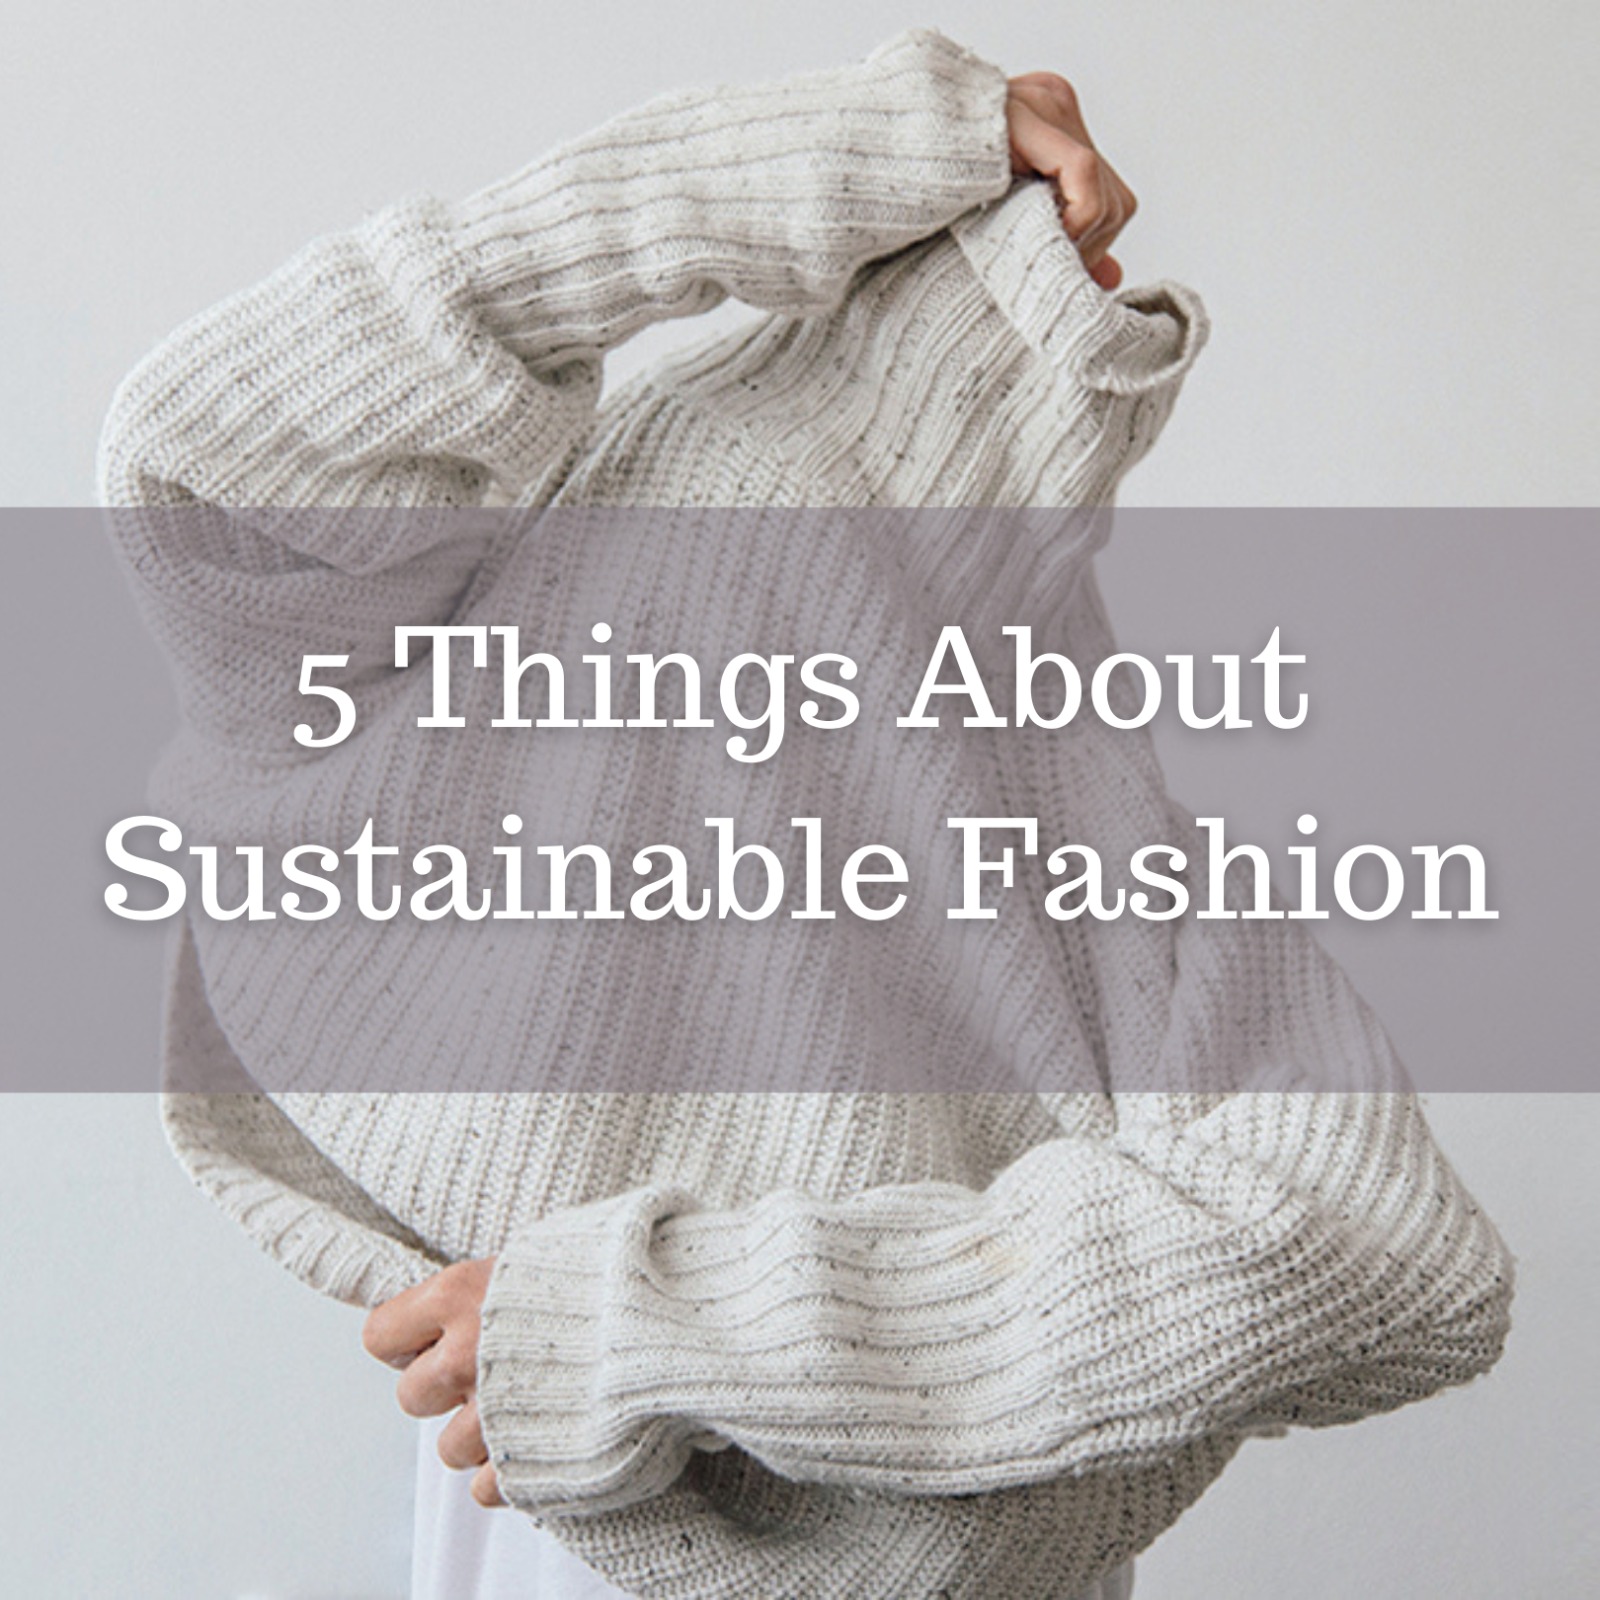 5 Things About Sustainable Fashion - Beyond The Polaris